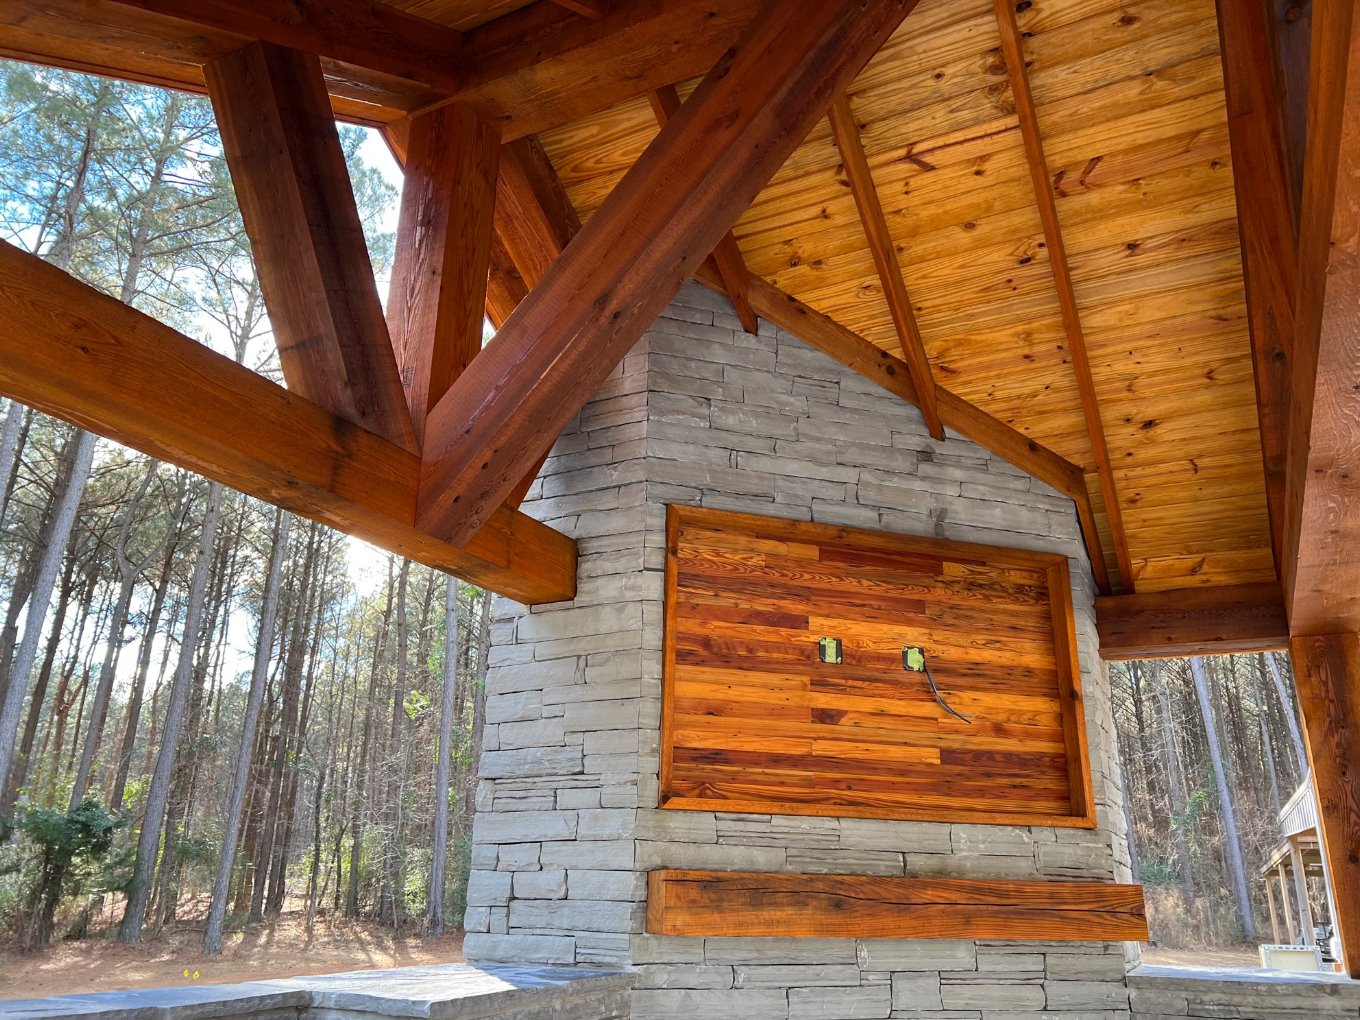 Pre-Stained Outdoor Wood Structure in Nashville, Tennessee